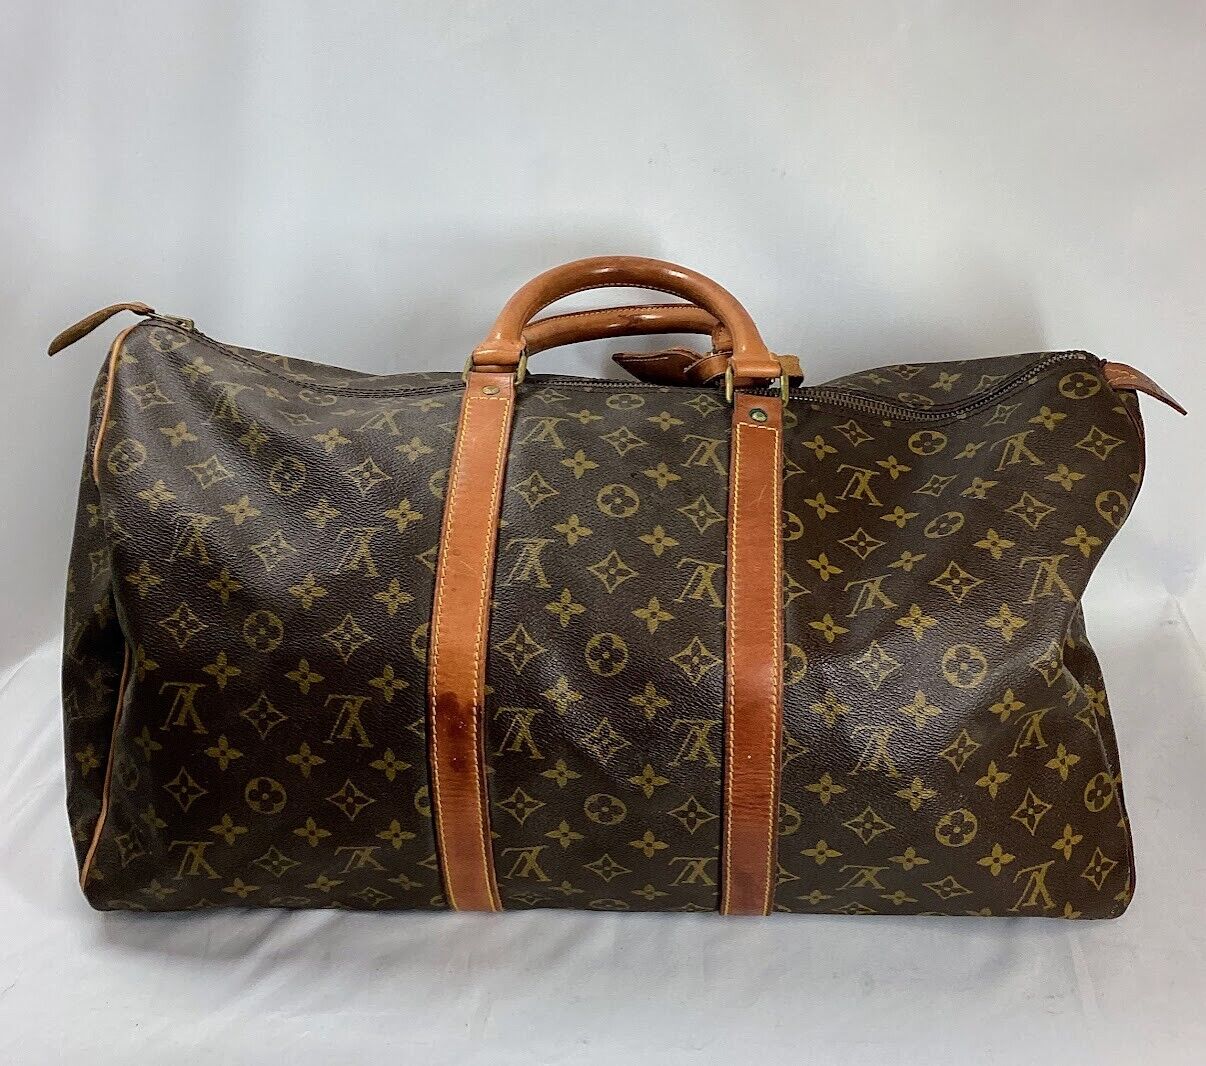 Louis Vuitton 2002 pre-owned Keepall 50 duffle bag